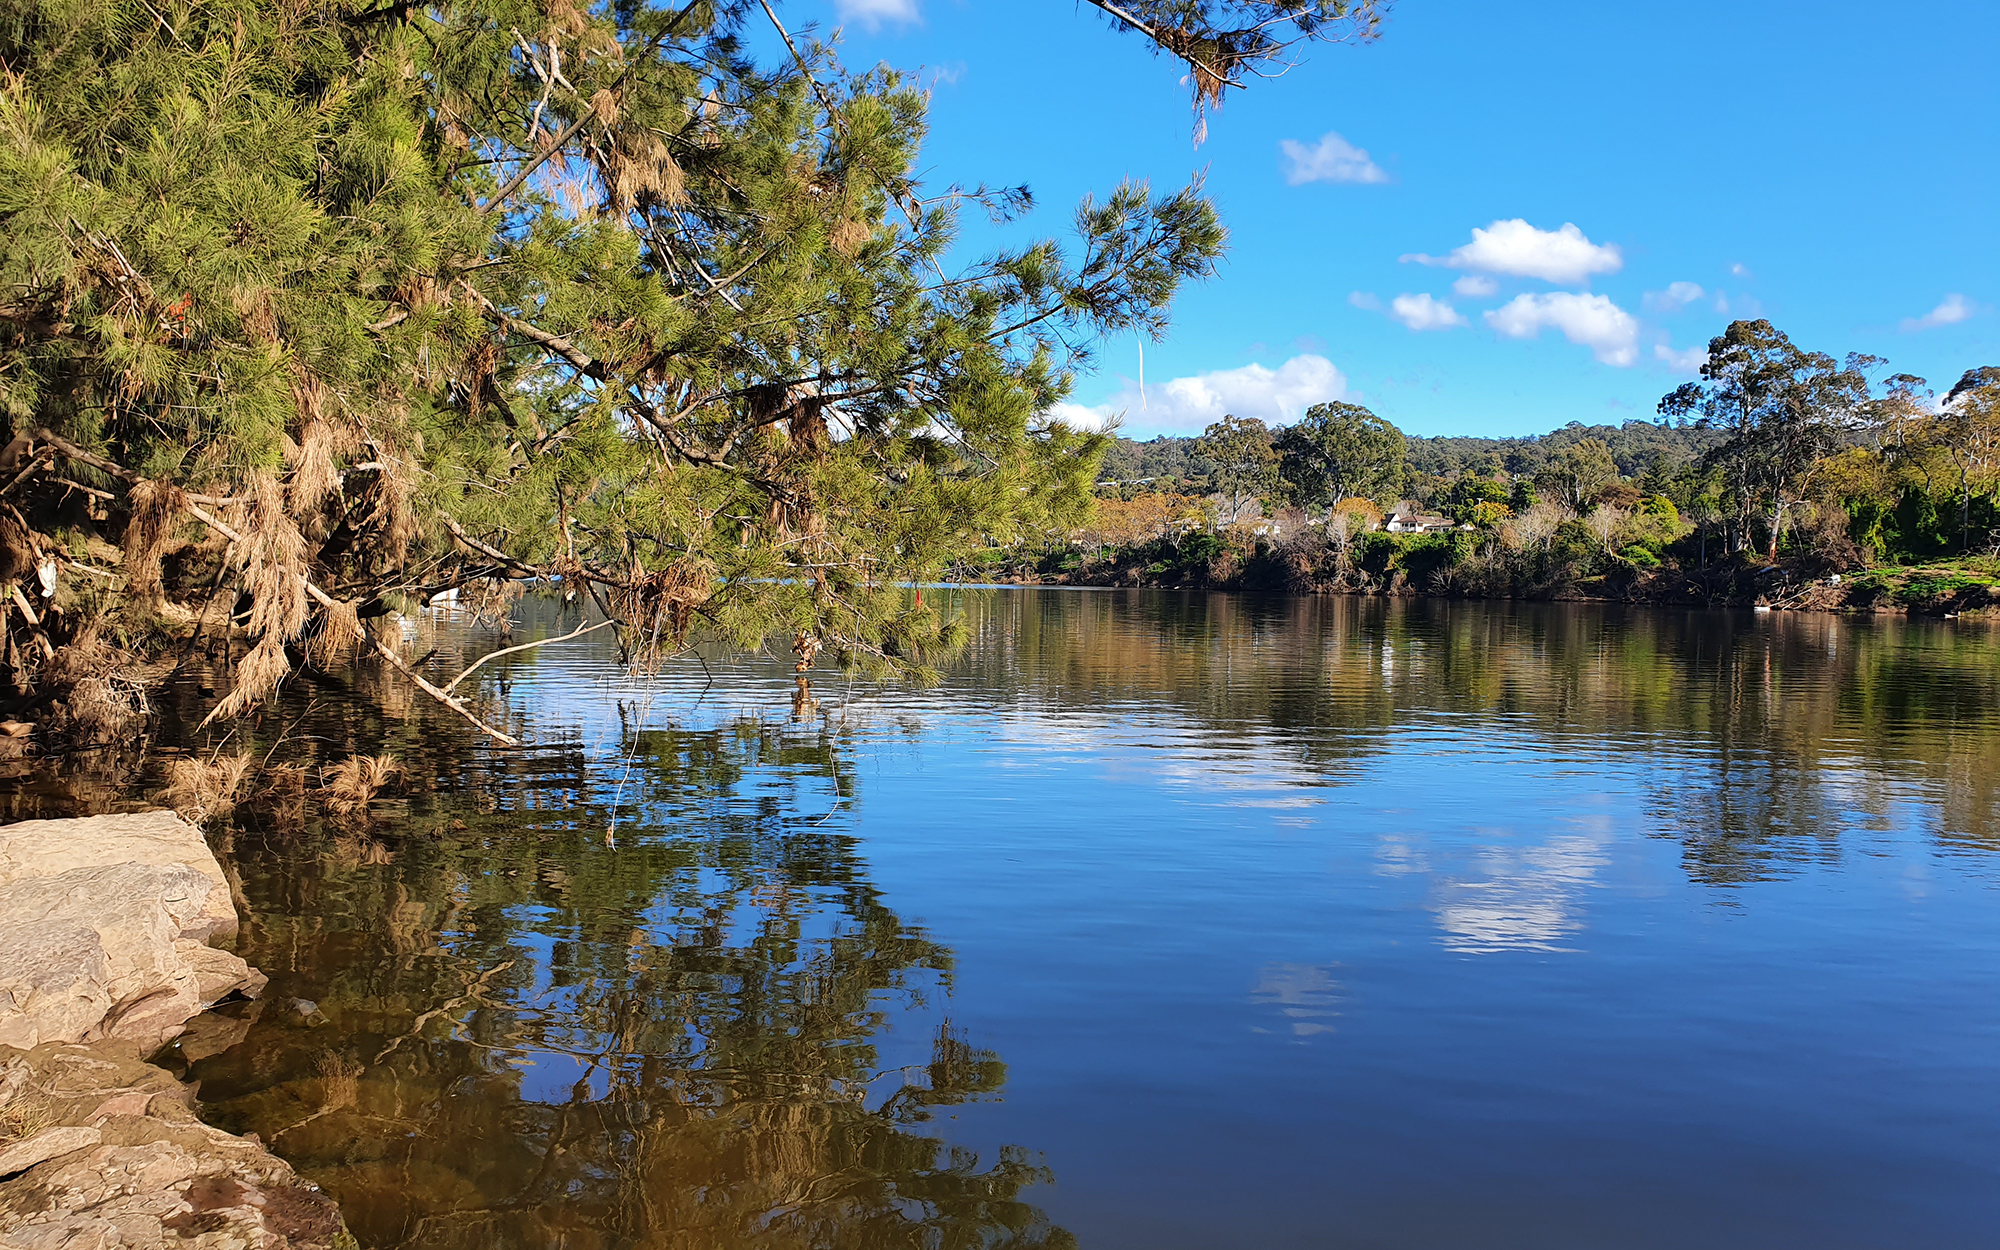 Nepean river on a sunny winter day with blue sky, trees and clouds reflecting on glassy water surface.